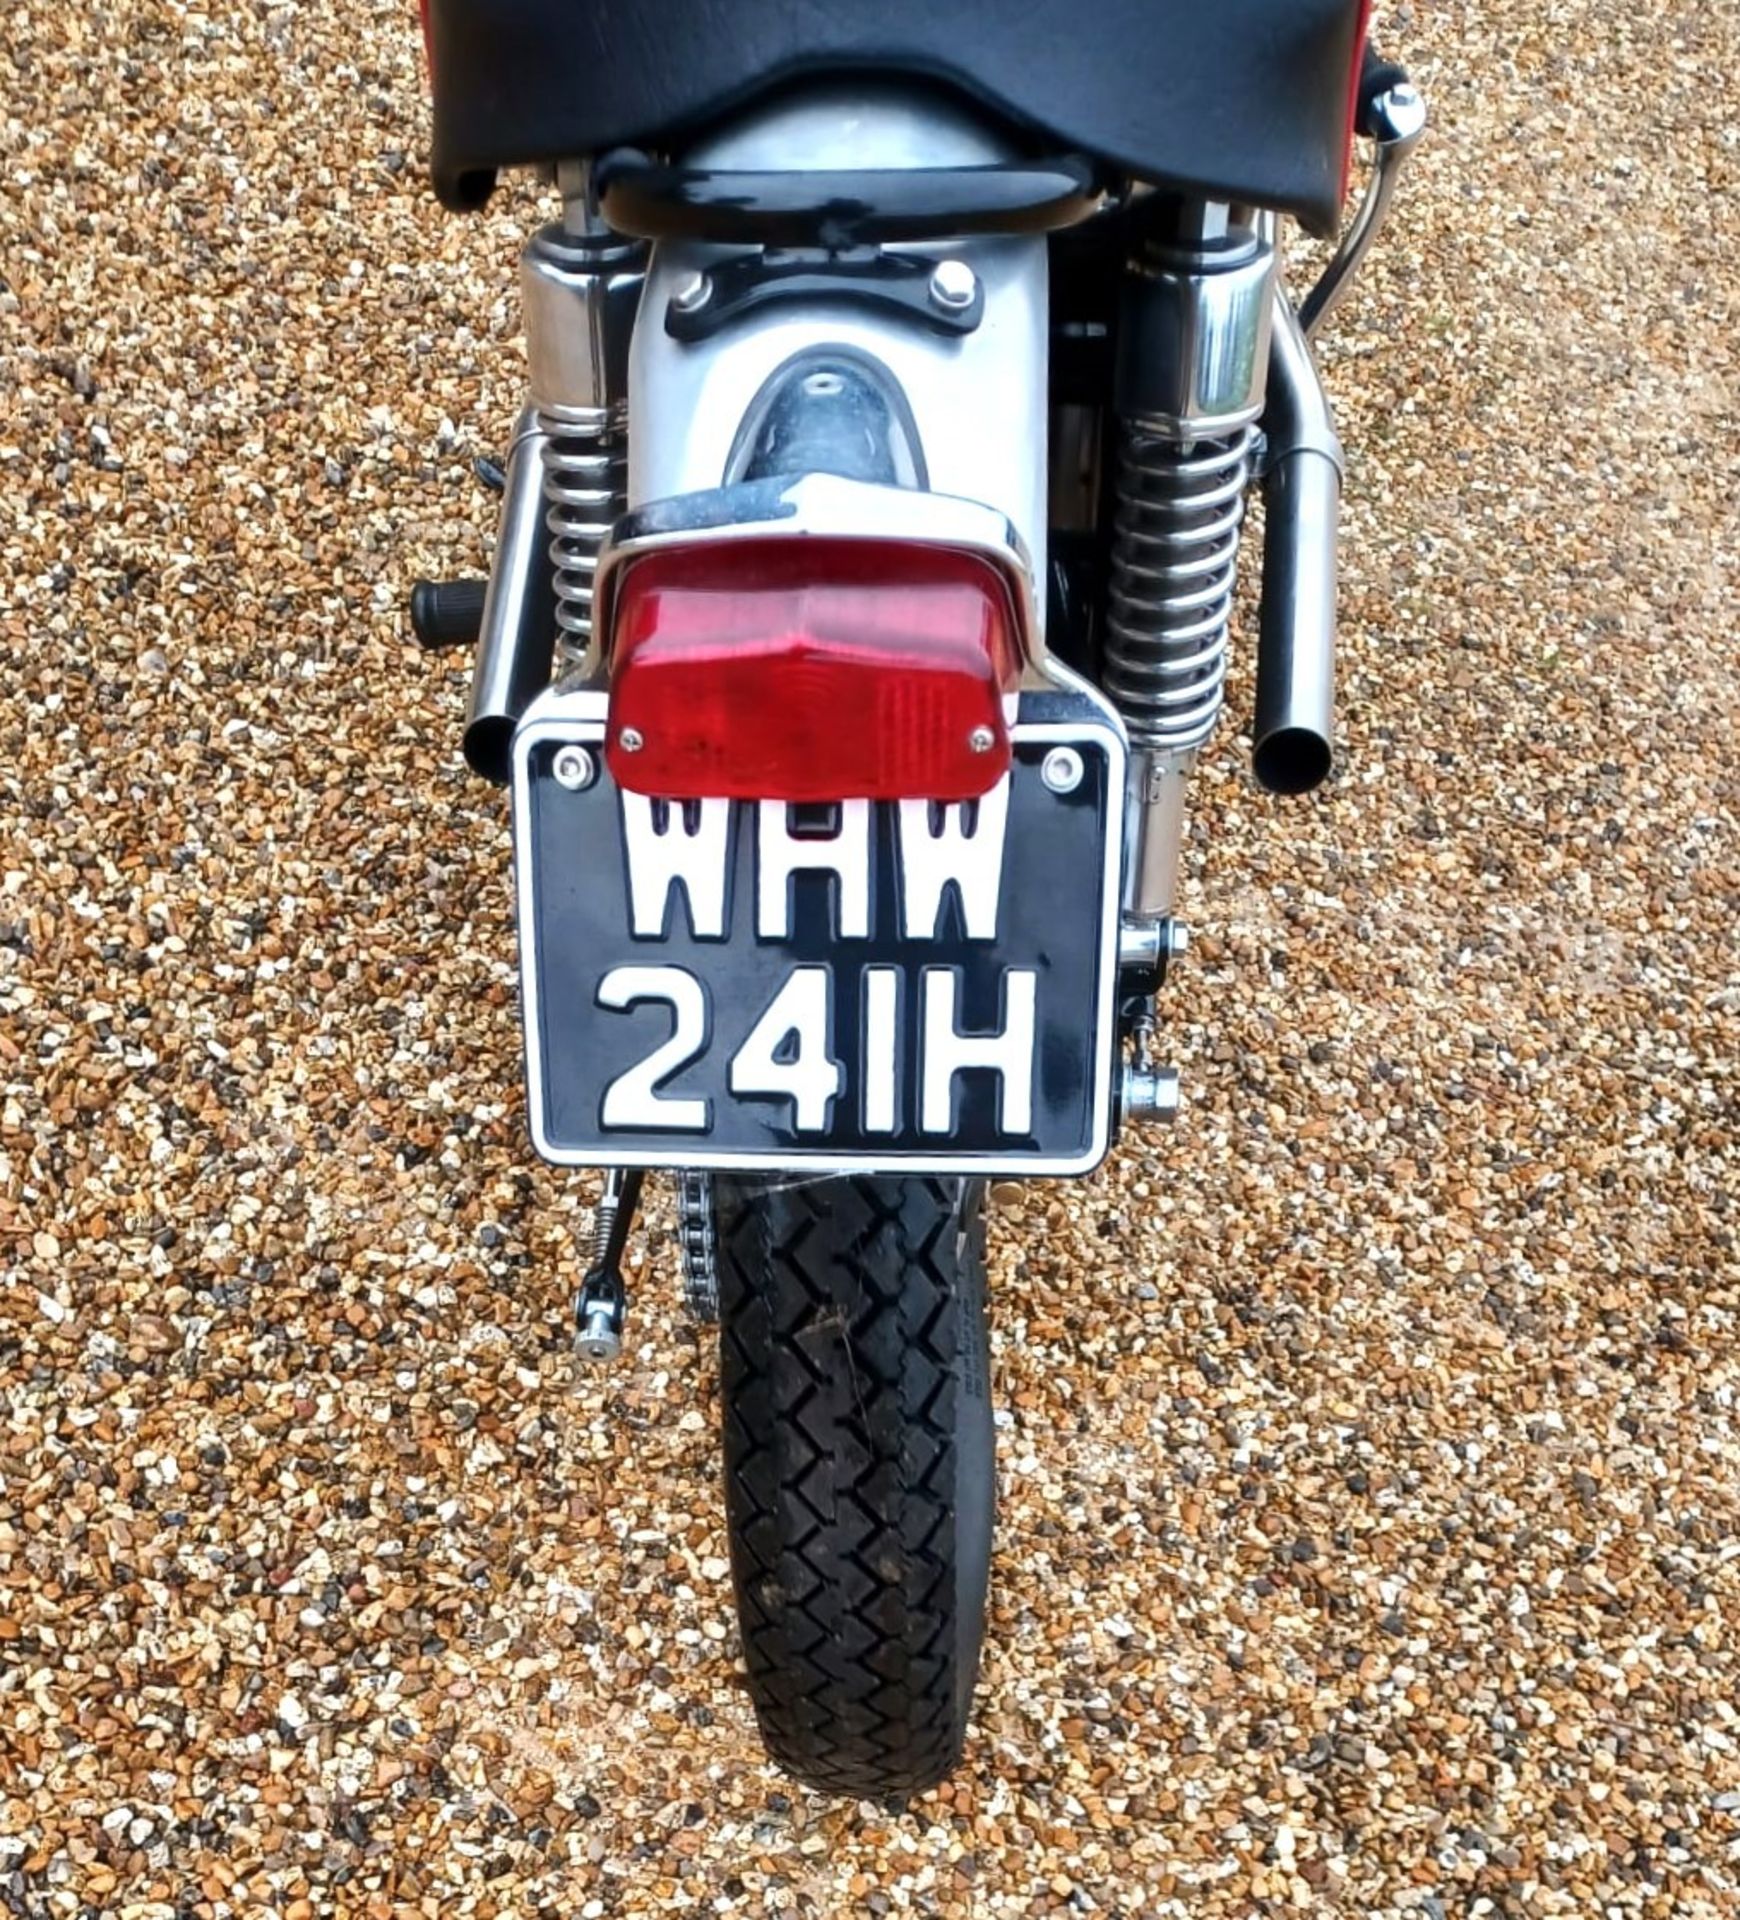 1969 TRITON 500cc Registration Number: WHW 241H Frame Number: TBA Recorded Mileage: 1658 - Subject - Image 11 of 14